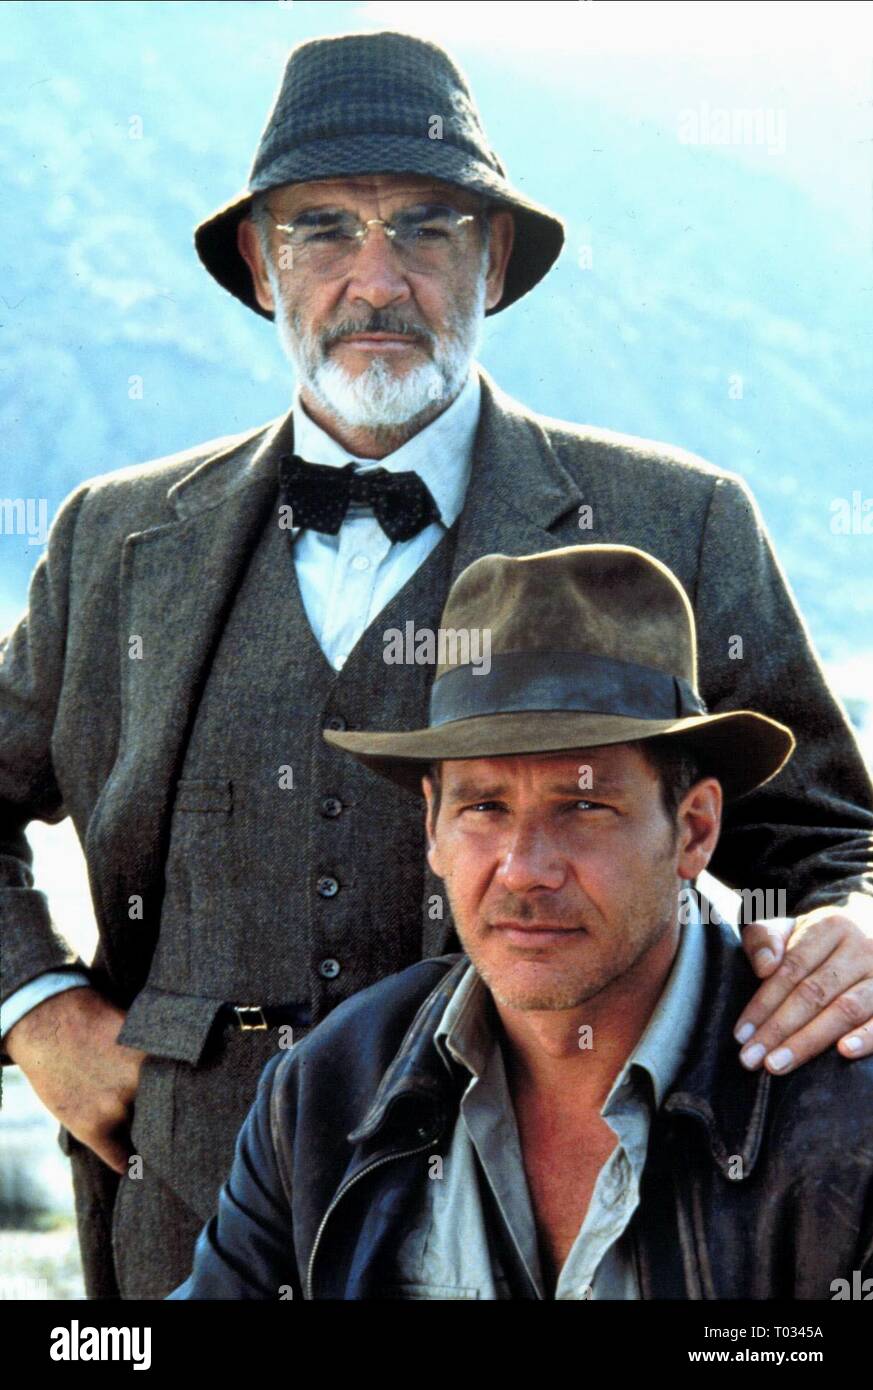 SEAN CONNERY HARRISON FORD INDIANA JONES AND THE LAST CRUSADE 1989